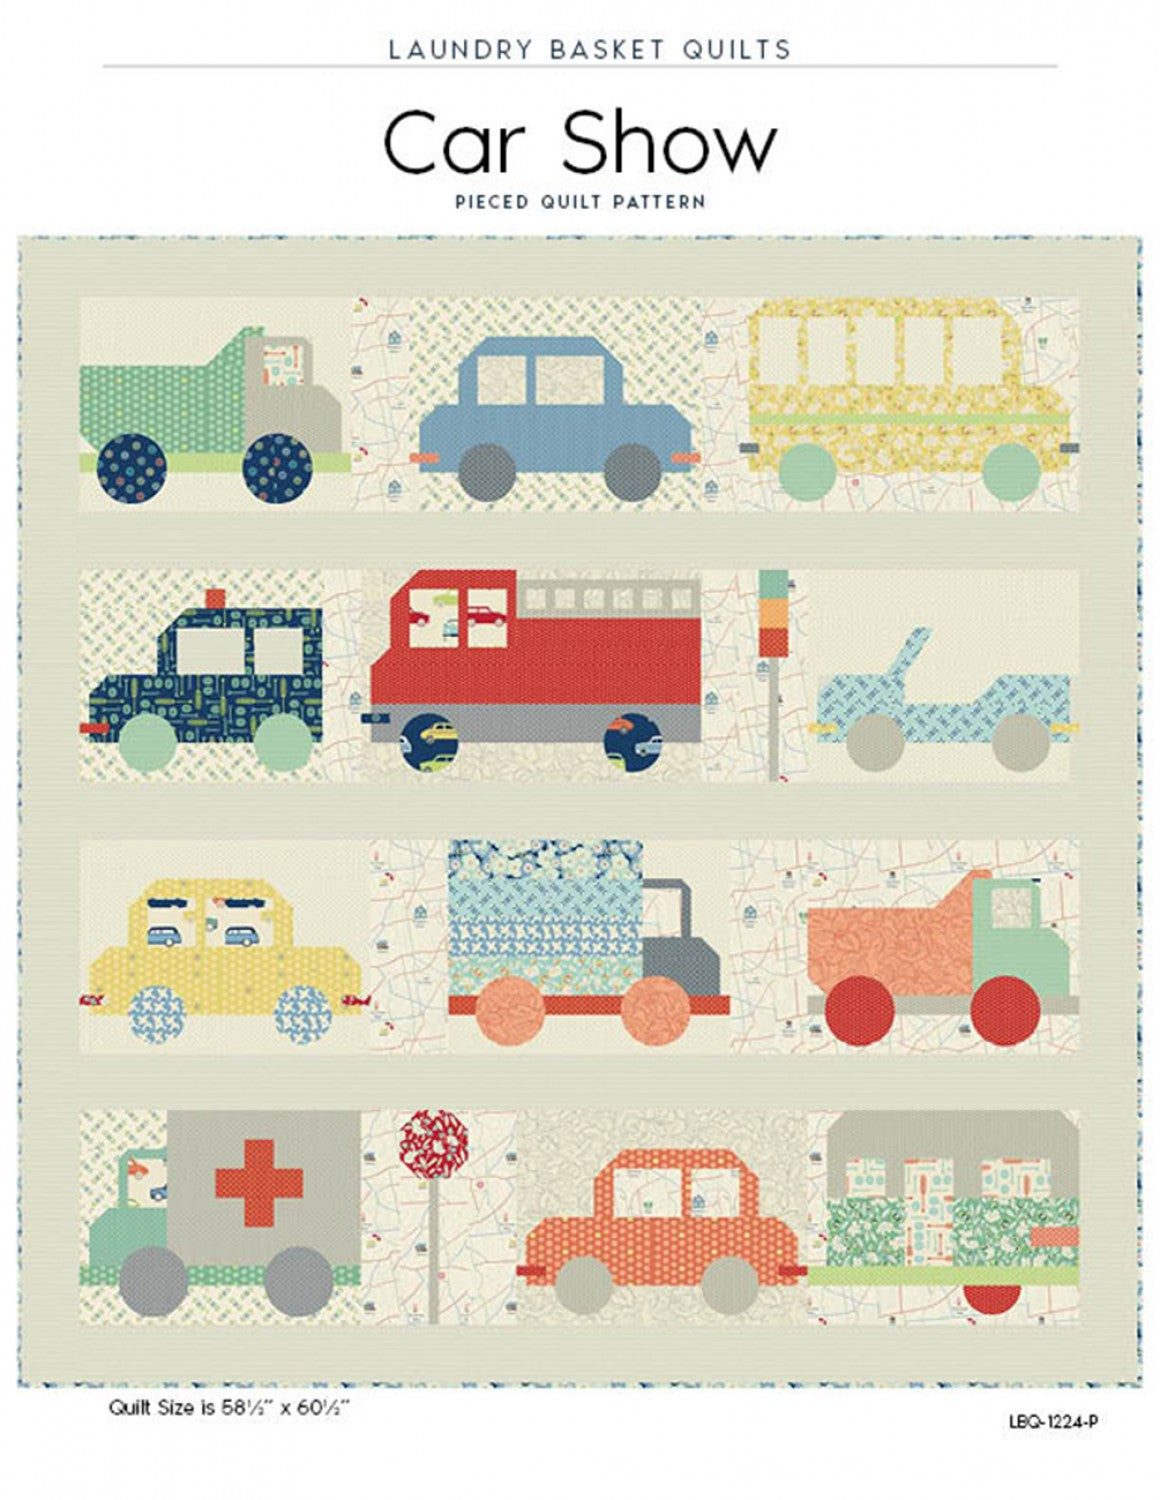 Car Show Quilt Pattern by Edyta Sitar of Laundry Basket Quilts